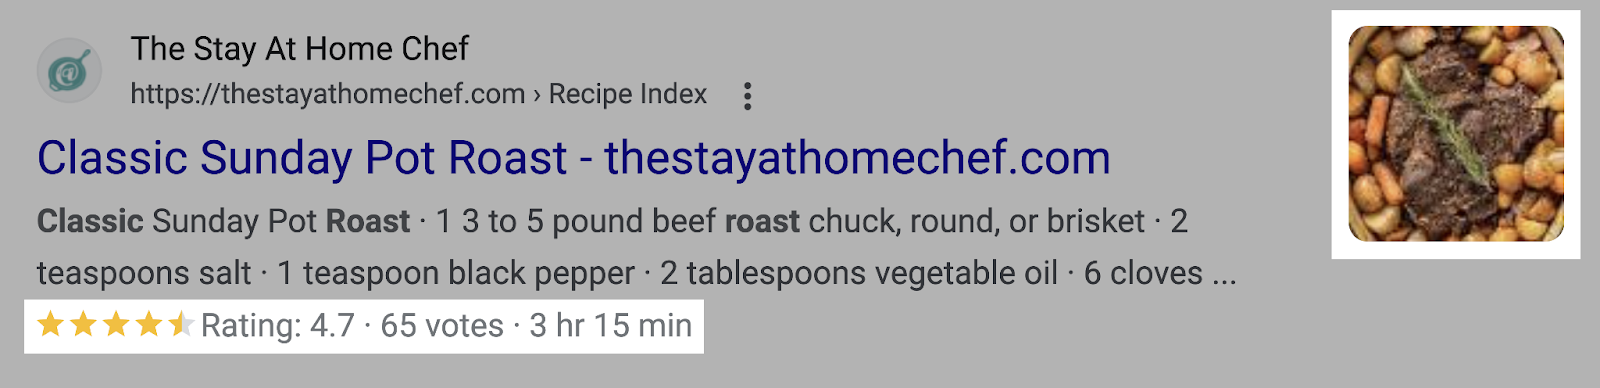 an example of a recipe snippet for classic Sunday pot roast on The Stay At Home Chef website